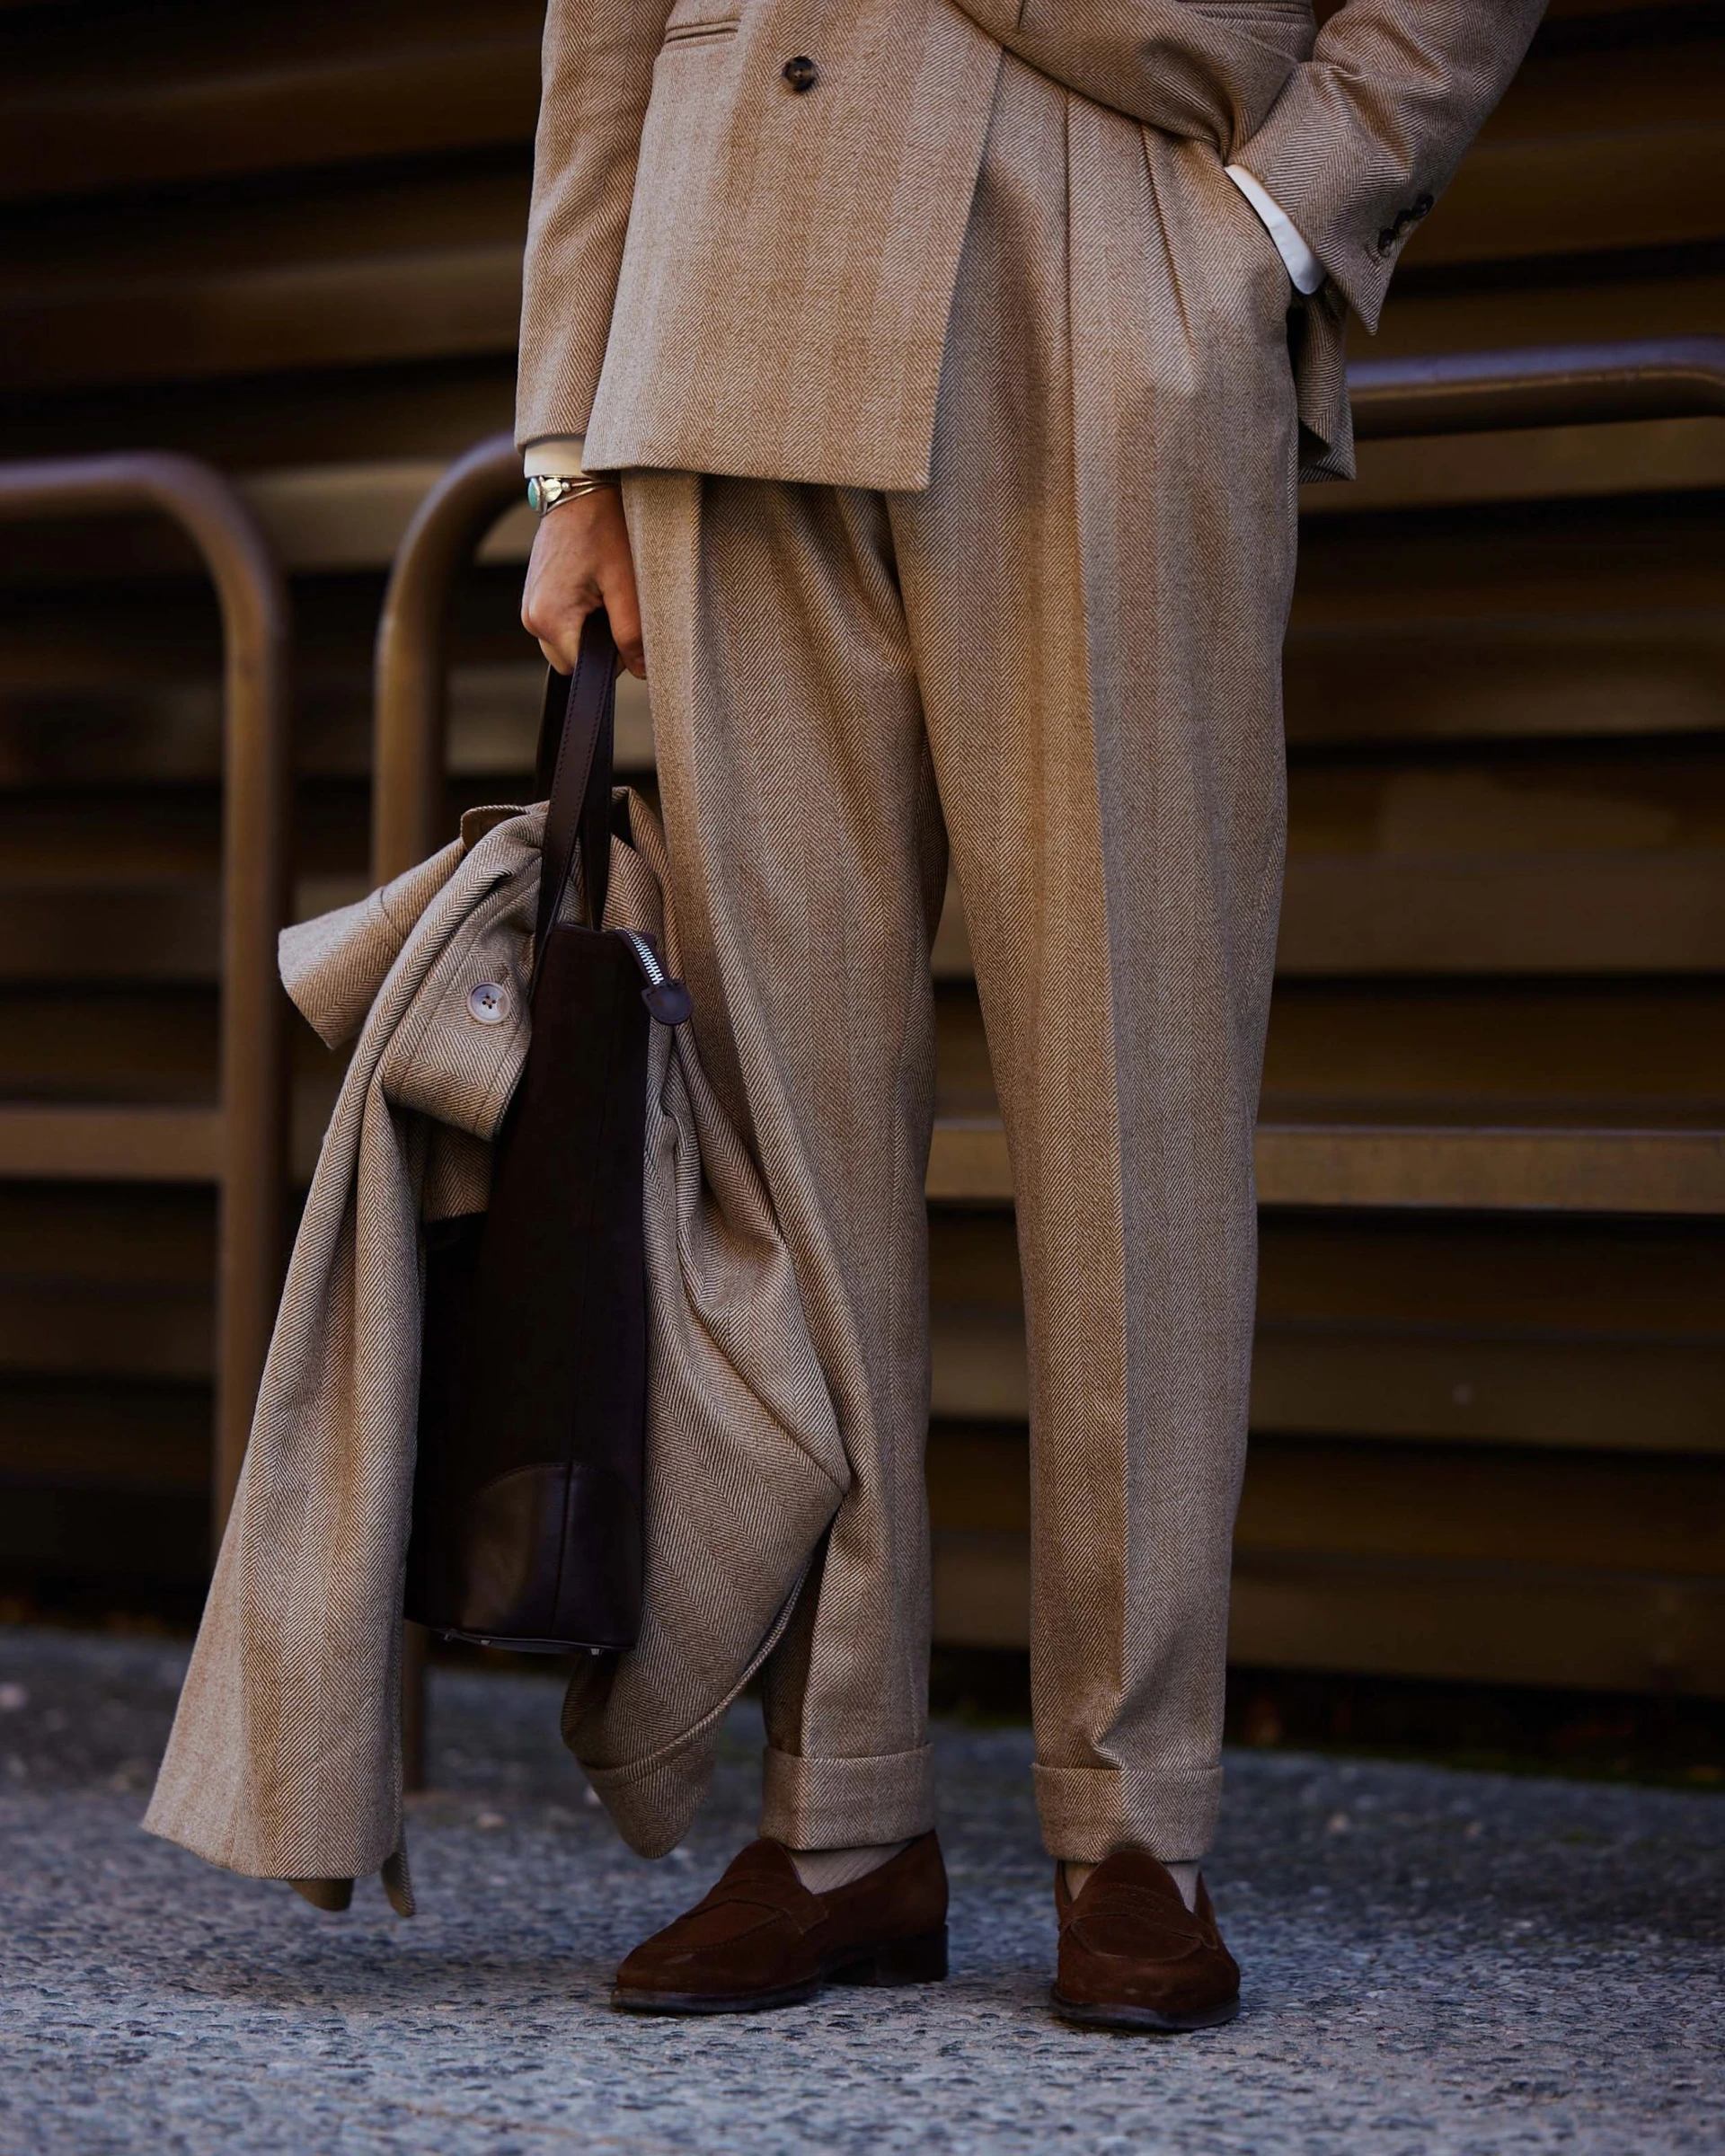 carlos domord at pitti uomo wearing a custom made mond herringbone coat and a matching suit